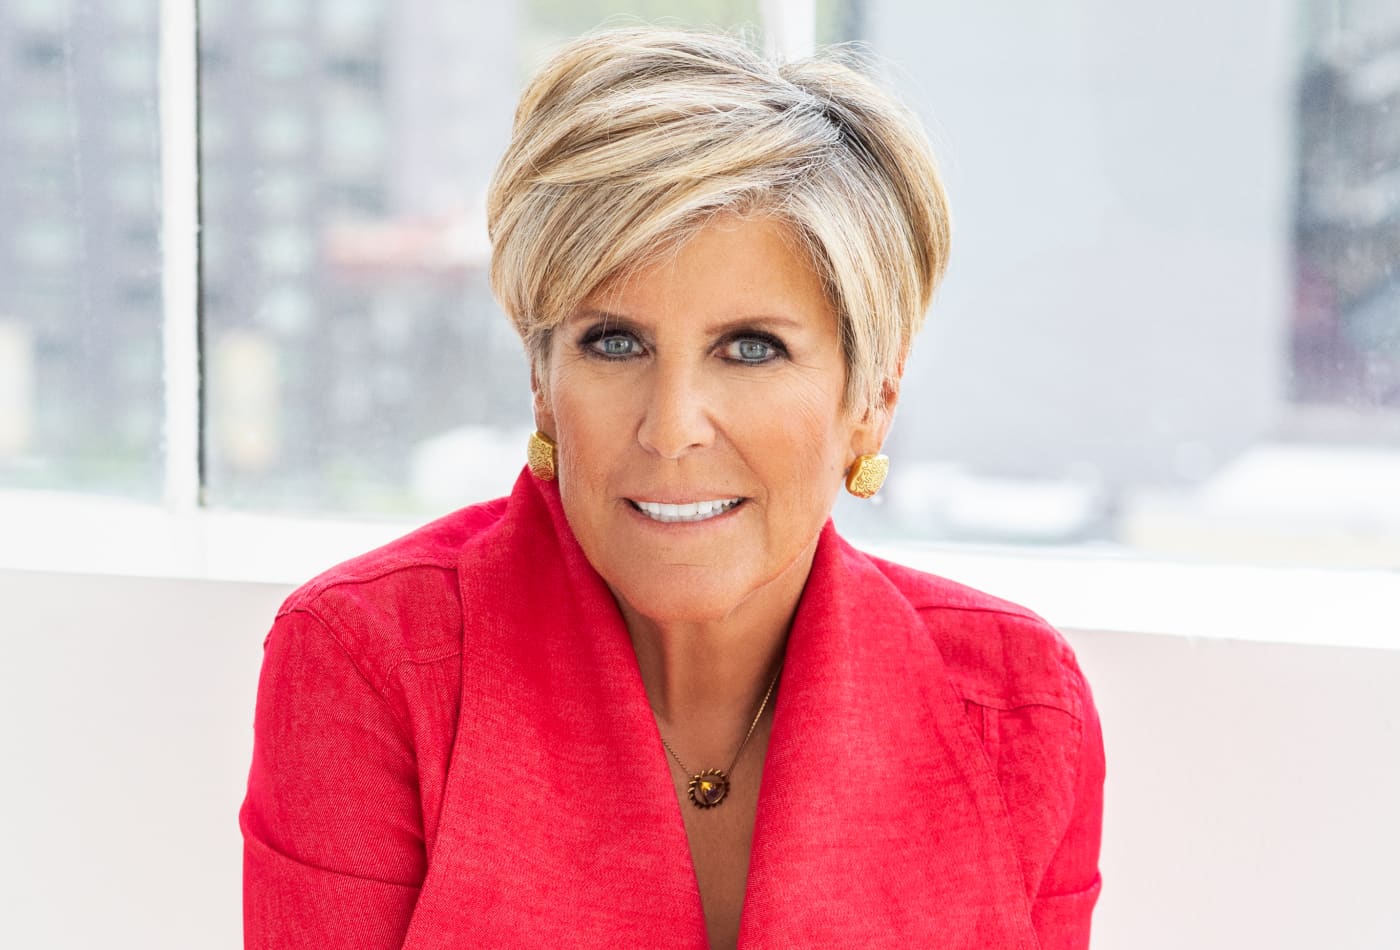 Suze orman investing for beginners proven profitable forex strategy